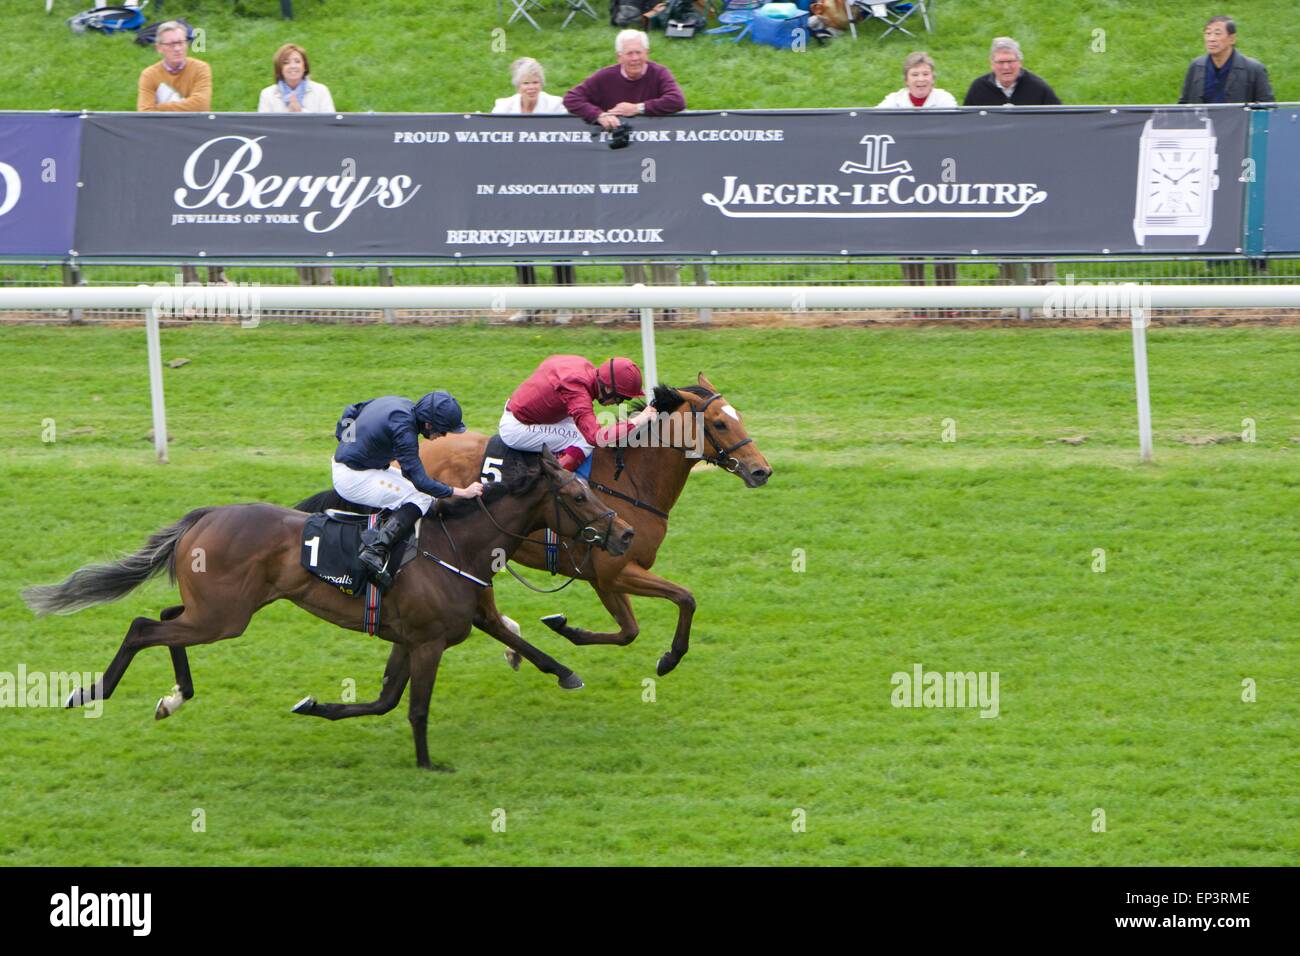 York, UK. 13th May, 2015. Frankie Dettori (in red ) wins the fourth race of the day - The Tattersalls Musidora Stakes - on Star of Seville, holding off the fast finishing Together Forever (number 1) at the Dante Festival at York. Horse-racing at York  UK Credit:  John Fryer/Alamy Live News Stock Photo